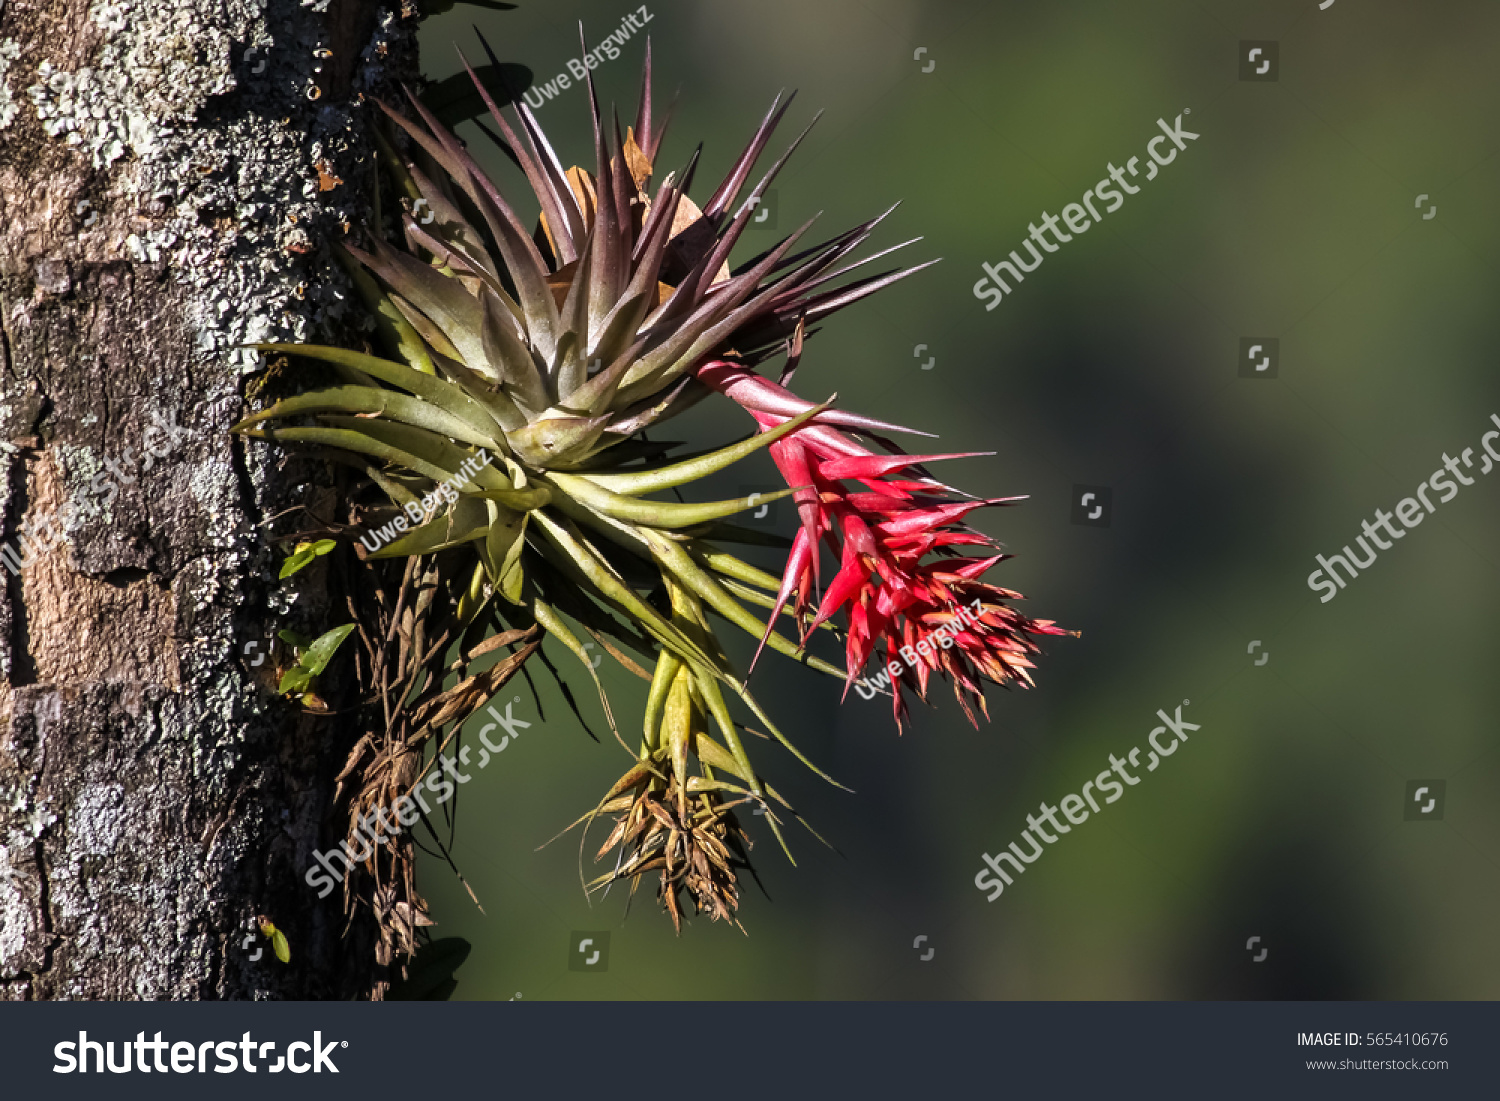 Tropical epiphyte with blossom, Itatiaia, Atlantic Forest, Brazil #565410676